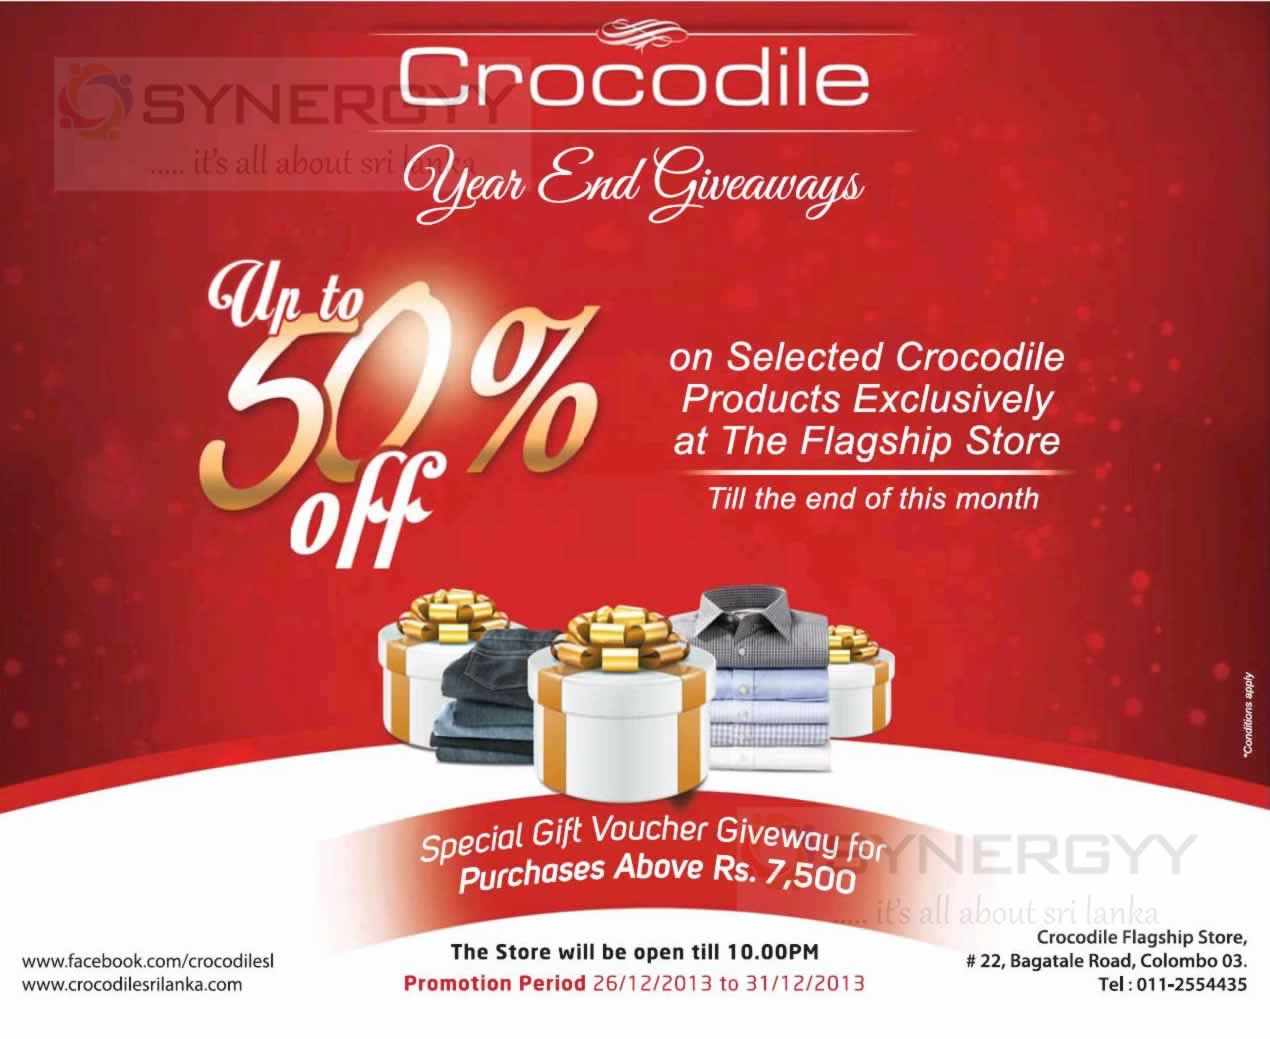 Best Prices of the Year ☆ Save up to - Crocodile Sri Lanka